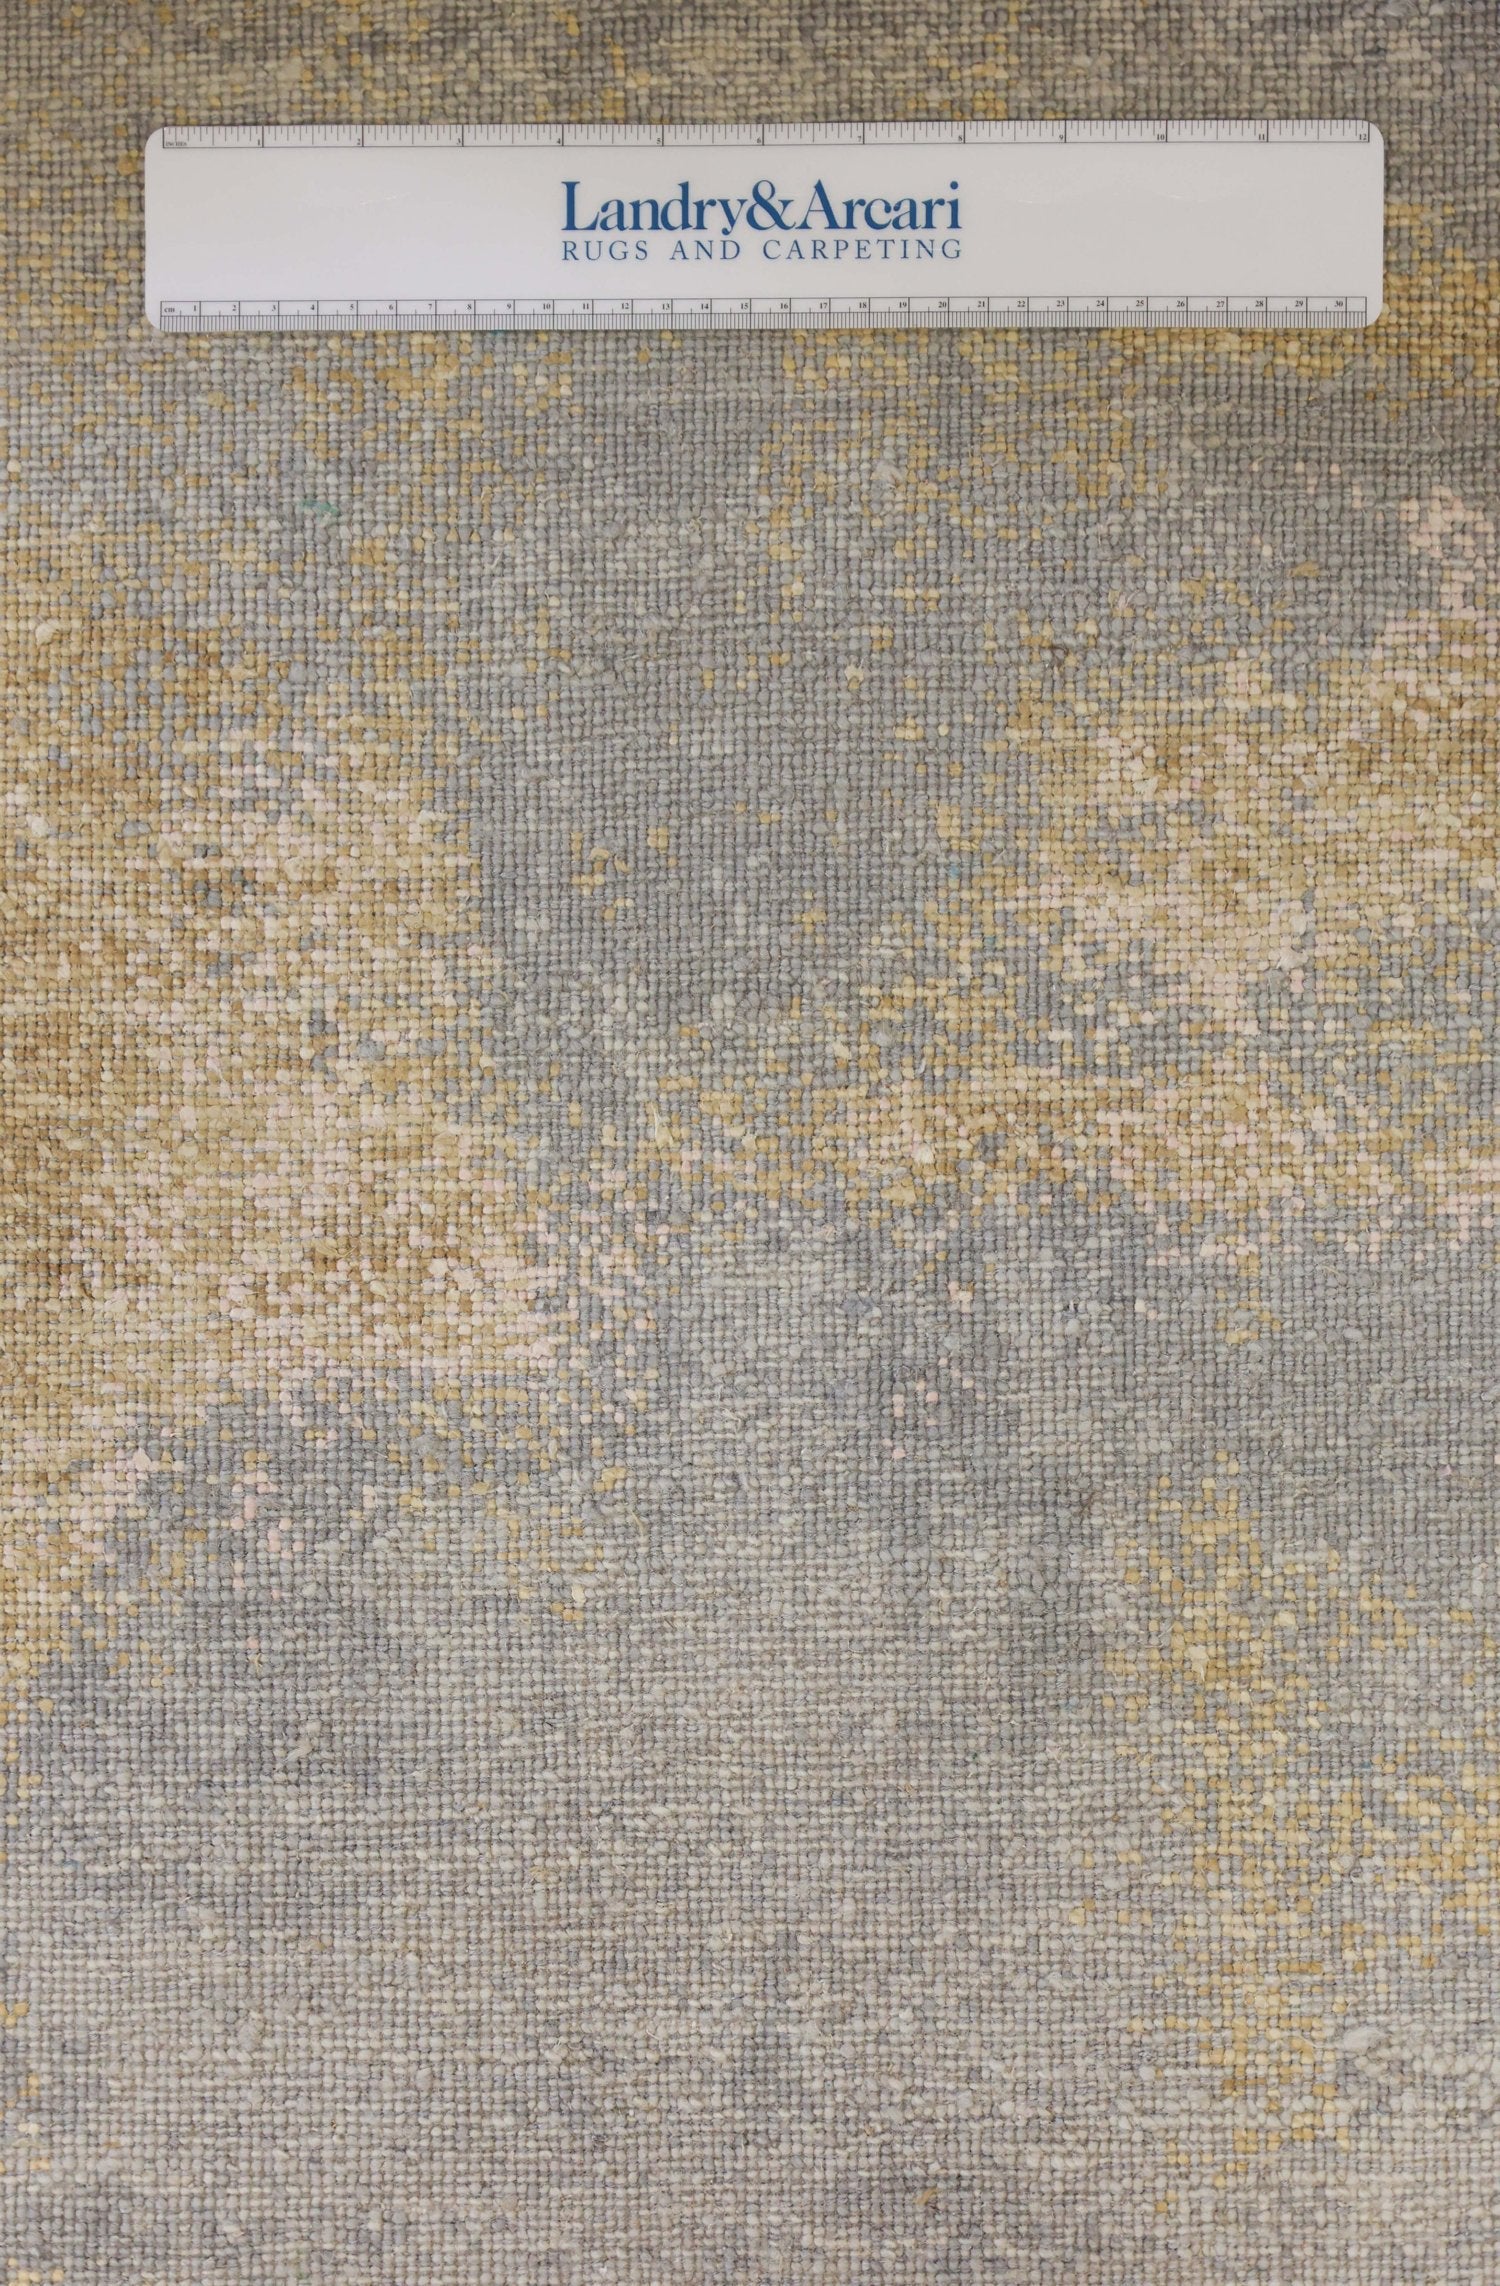 Weathered Handwoven Contemporary Rug, J73660